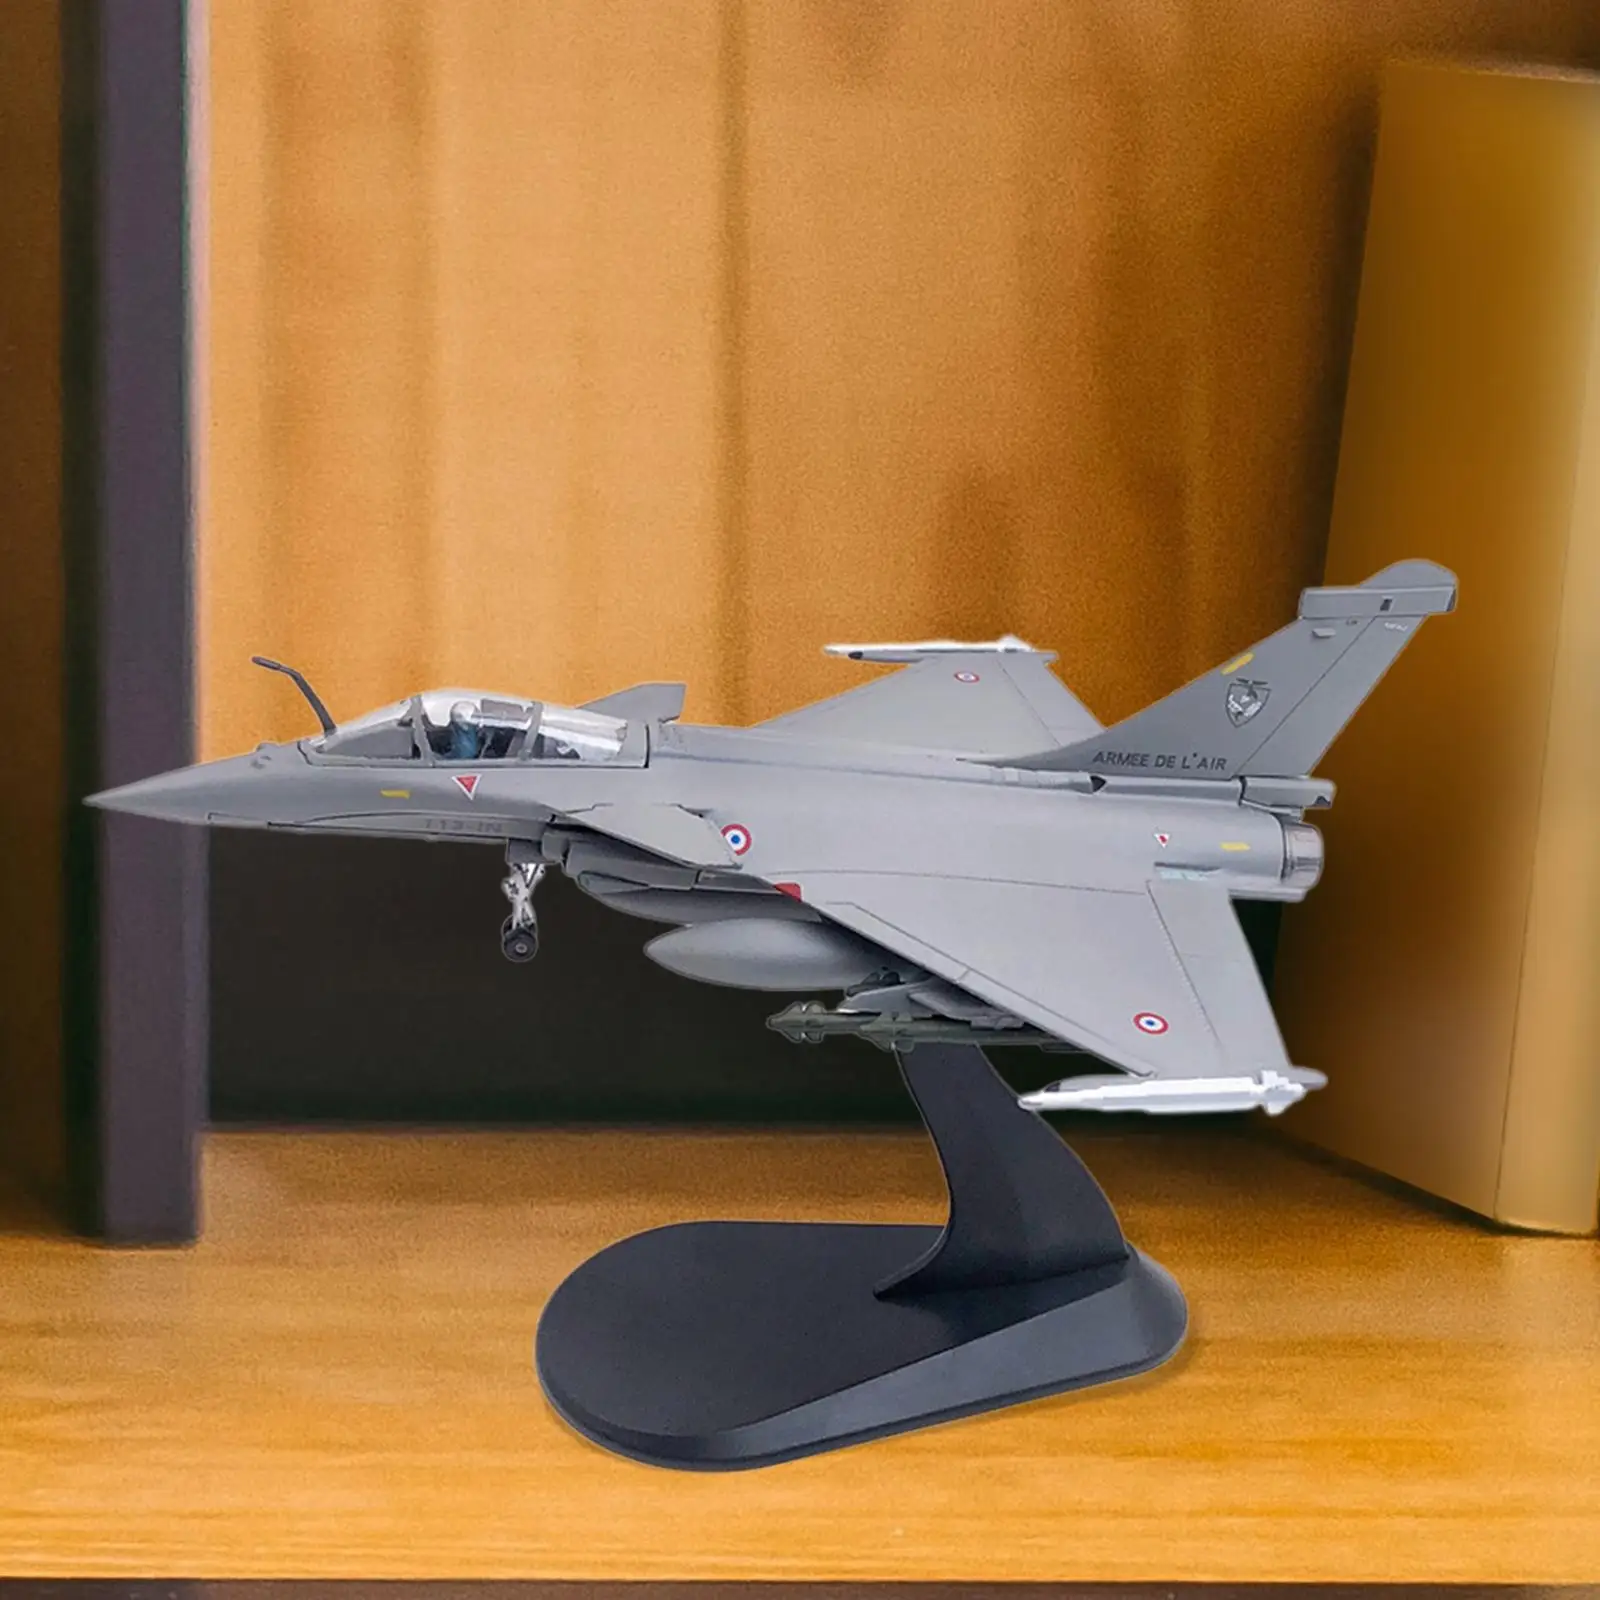 1/100 Scale French Plane Model Simulation Aircraft Model with Stand Fighter Model for Shelf Home Bedroom Collectibles Decoration